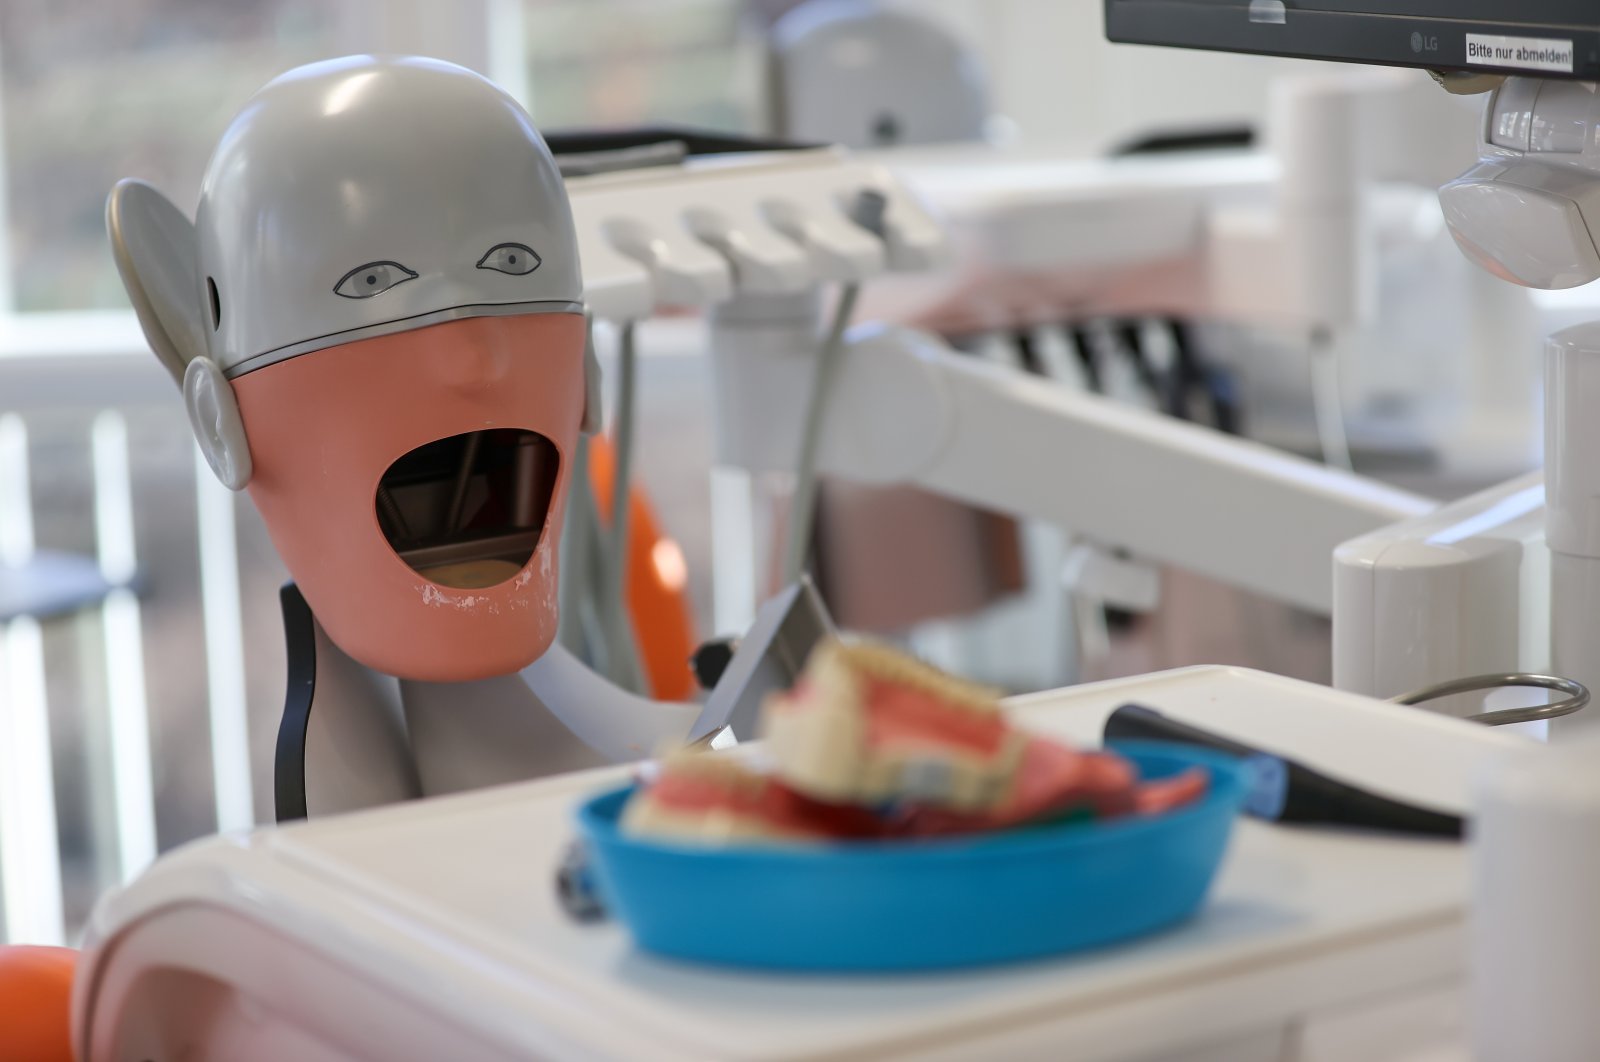 A "phantom patient" waits at the dentistry department at Leipzig University in Saxony, Leipzig, Germany, Jan. 21, 2021. (Getty Images)